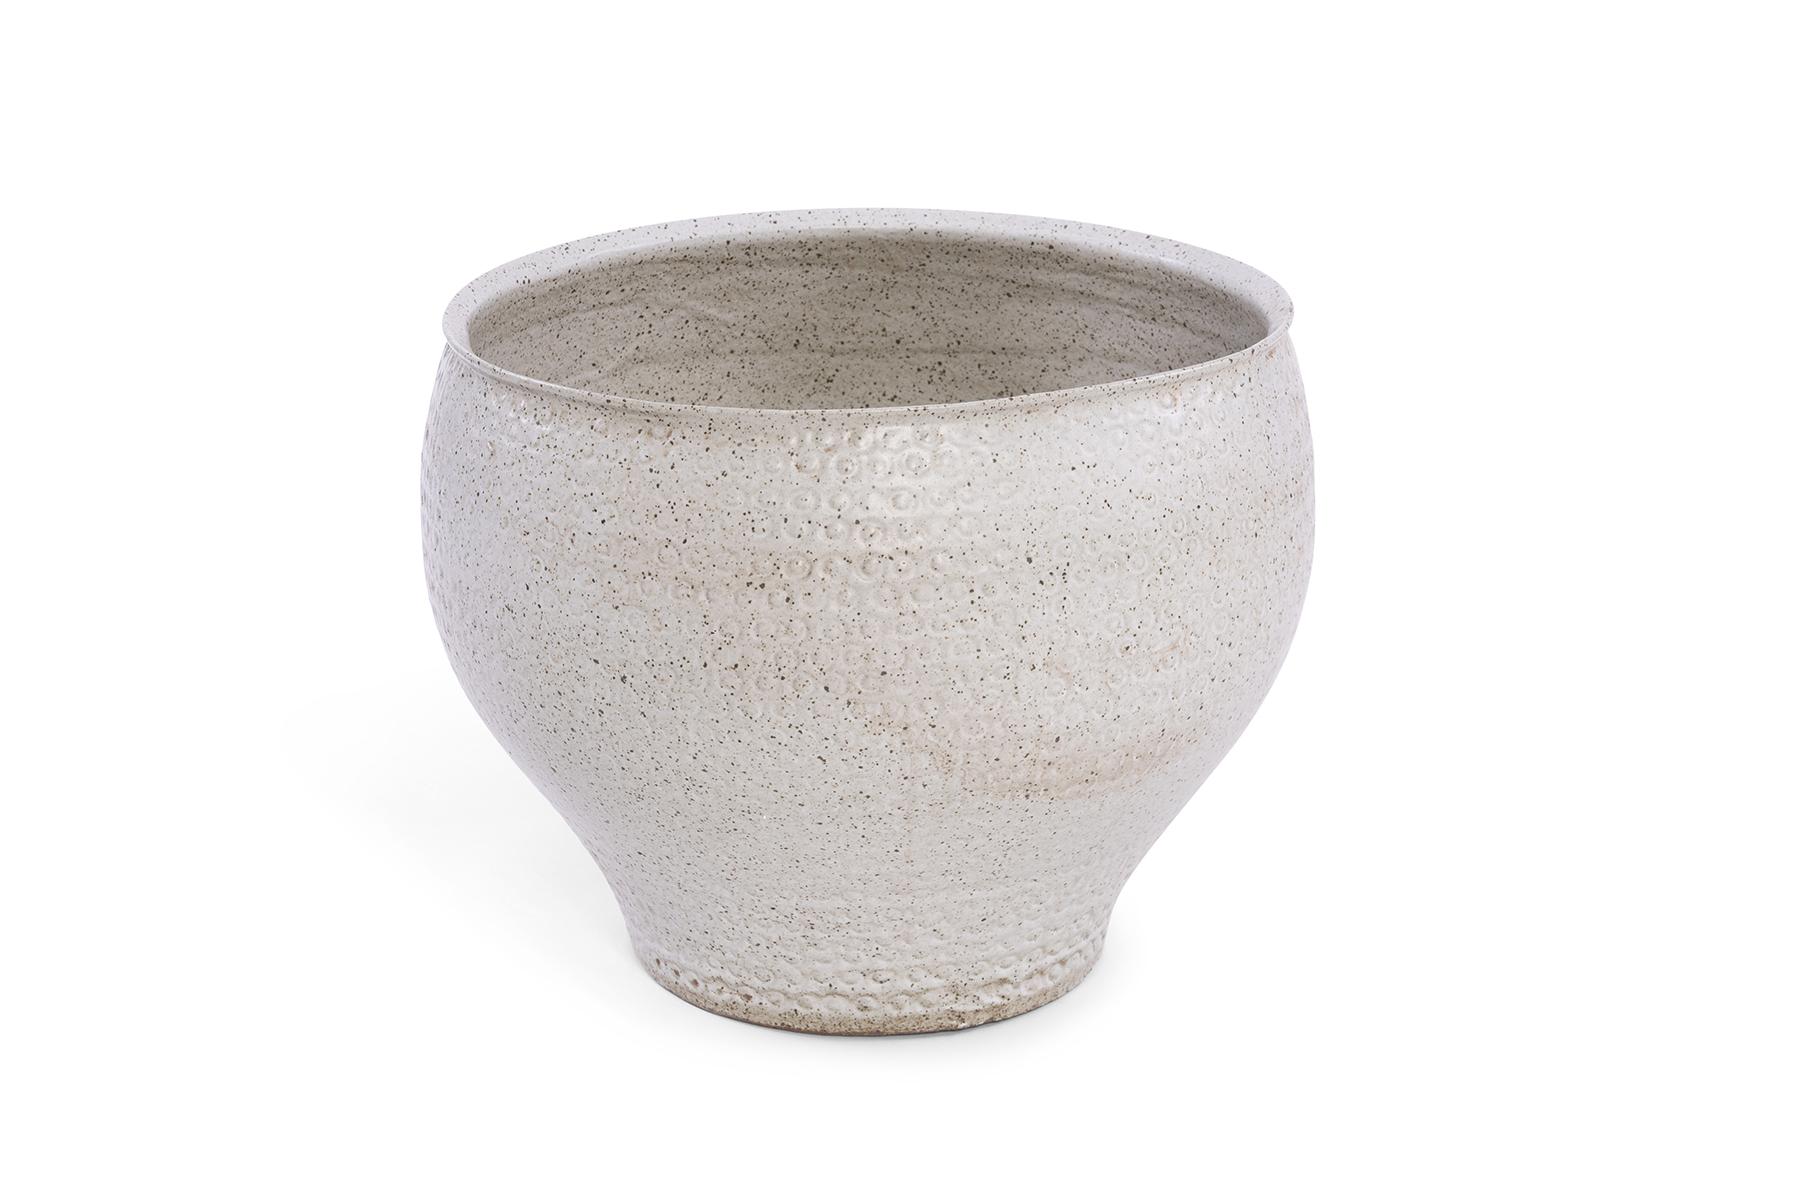 David Cressey ‘Cheerio’ vessel circa early 1960s. This all original example has tones of off whites, creams and browns.